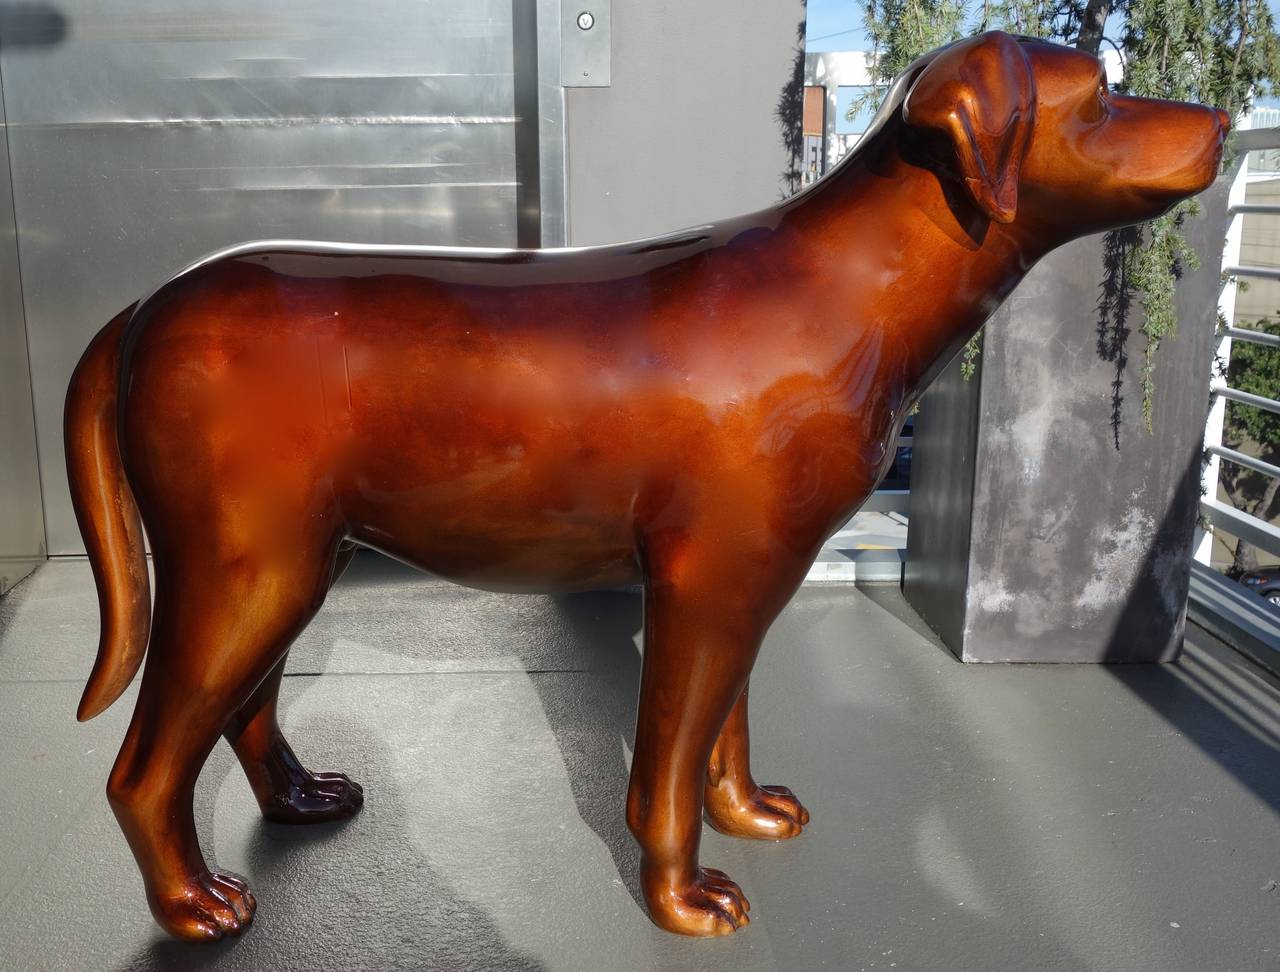 This is a life sized chocolate lab sculpture by noted San Francisco artist, Sandro Tchikovani. Made of fiberglass and painted in this delicious chocolate color. Man's best friend ! House-trained and obedient.